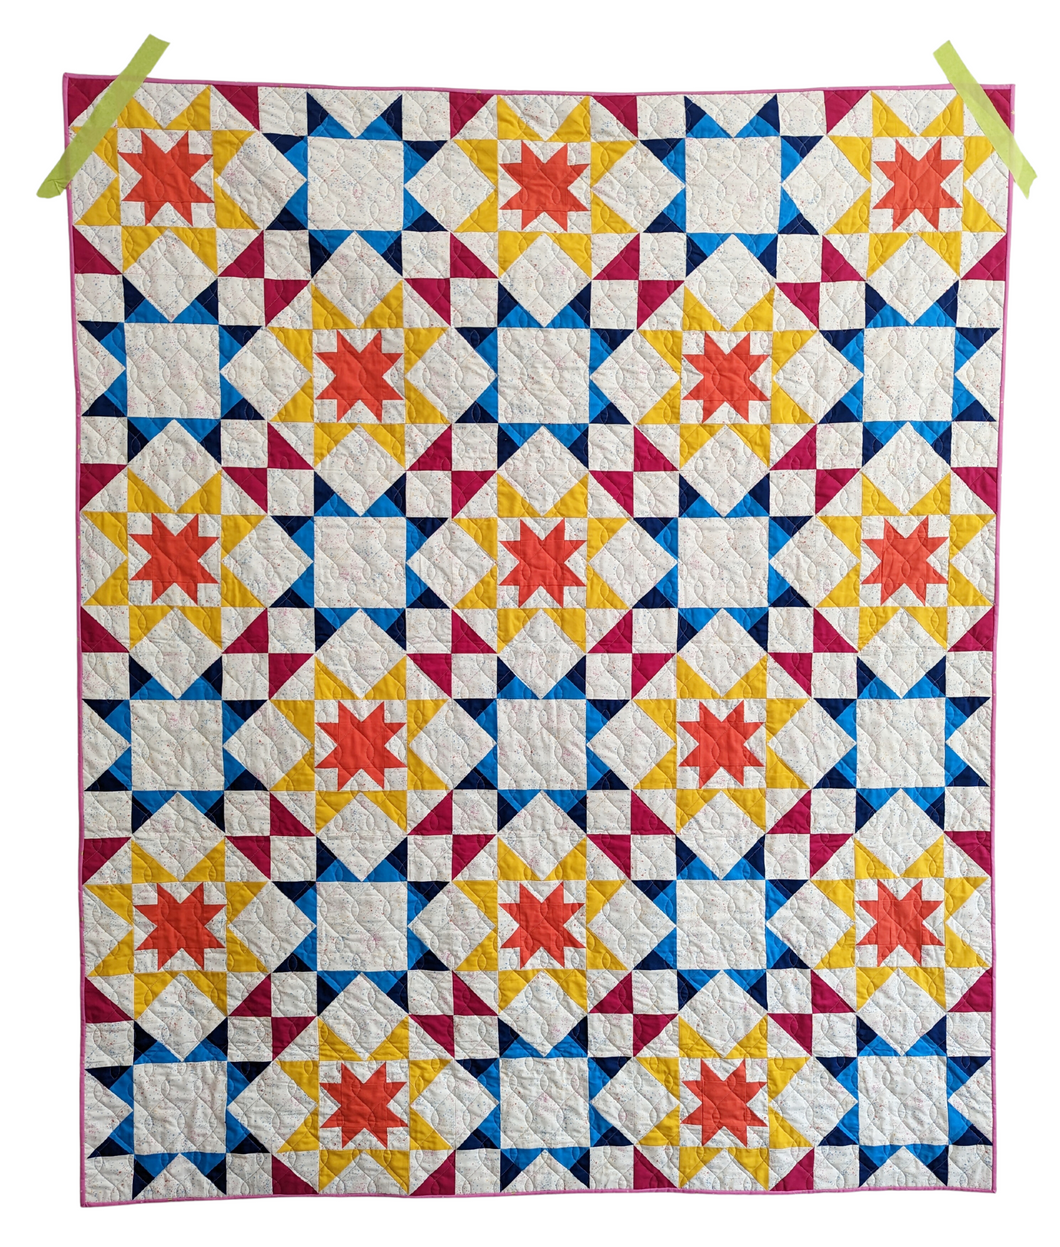 Glam PAPER Quilt Pattern